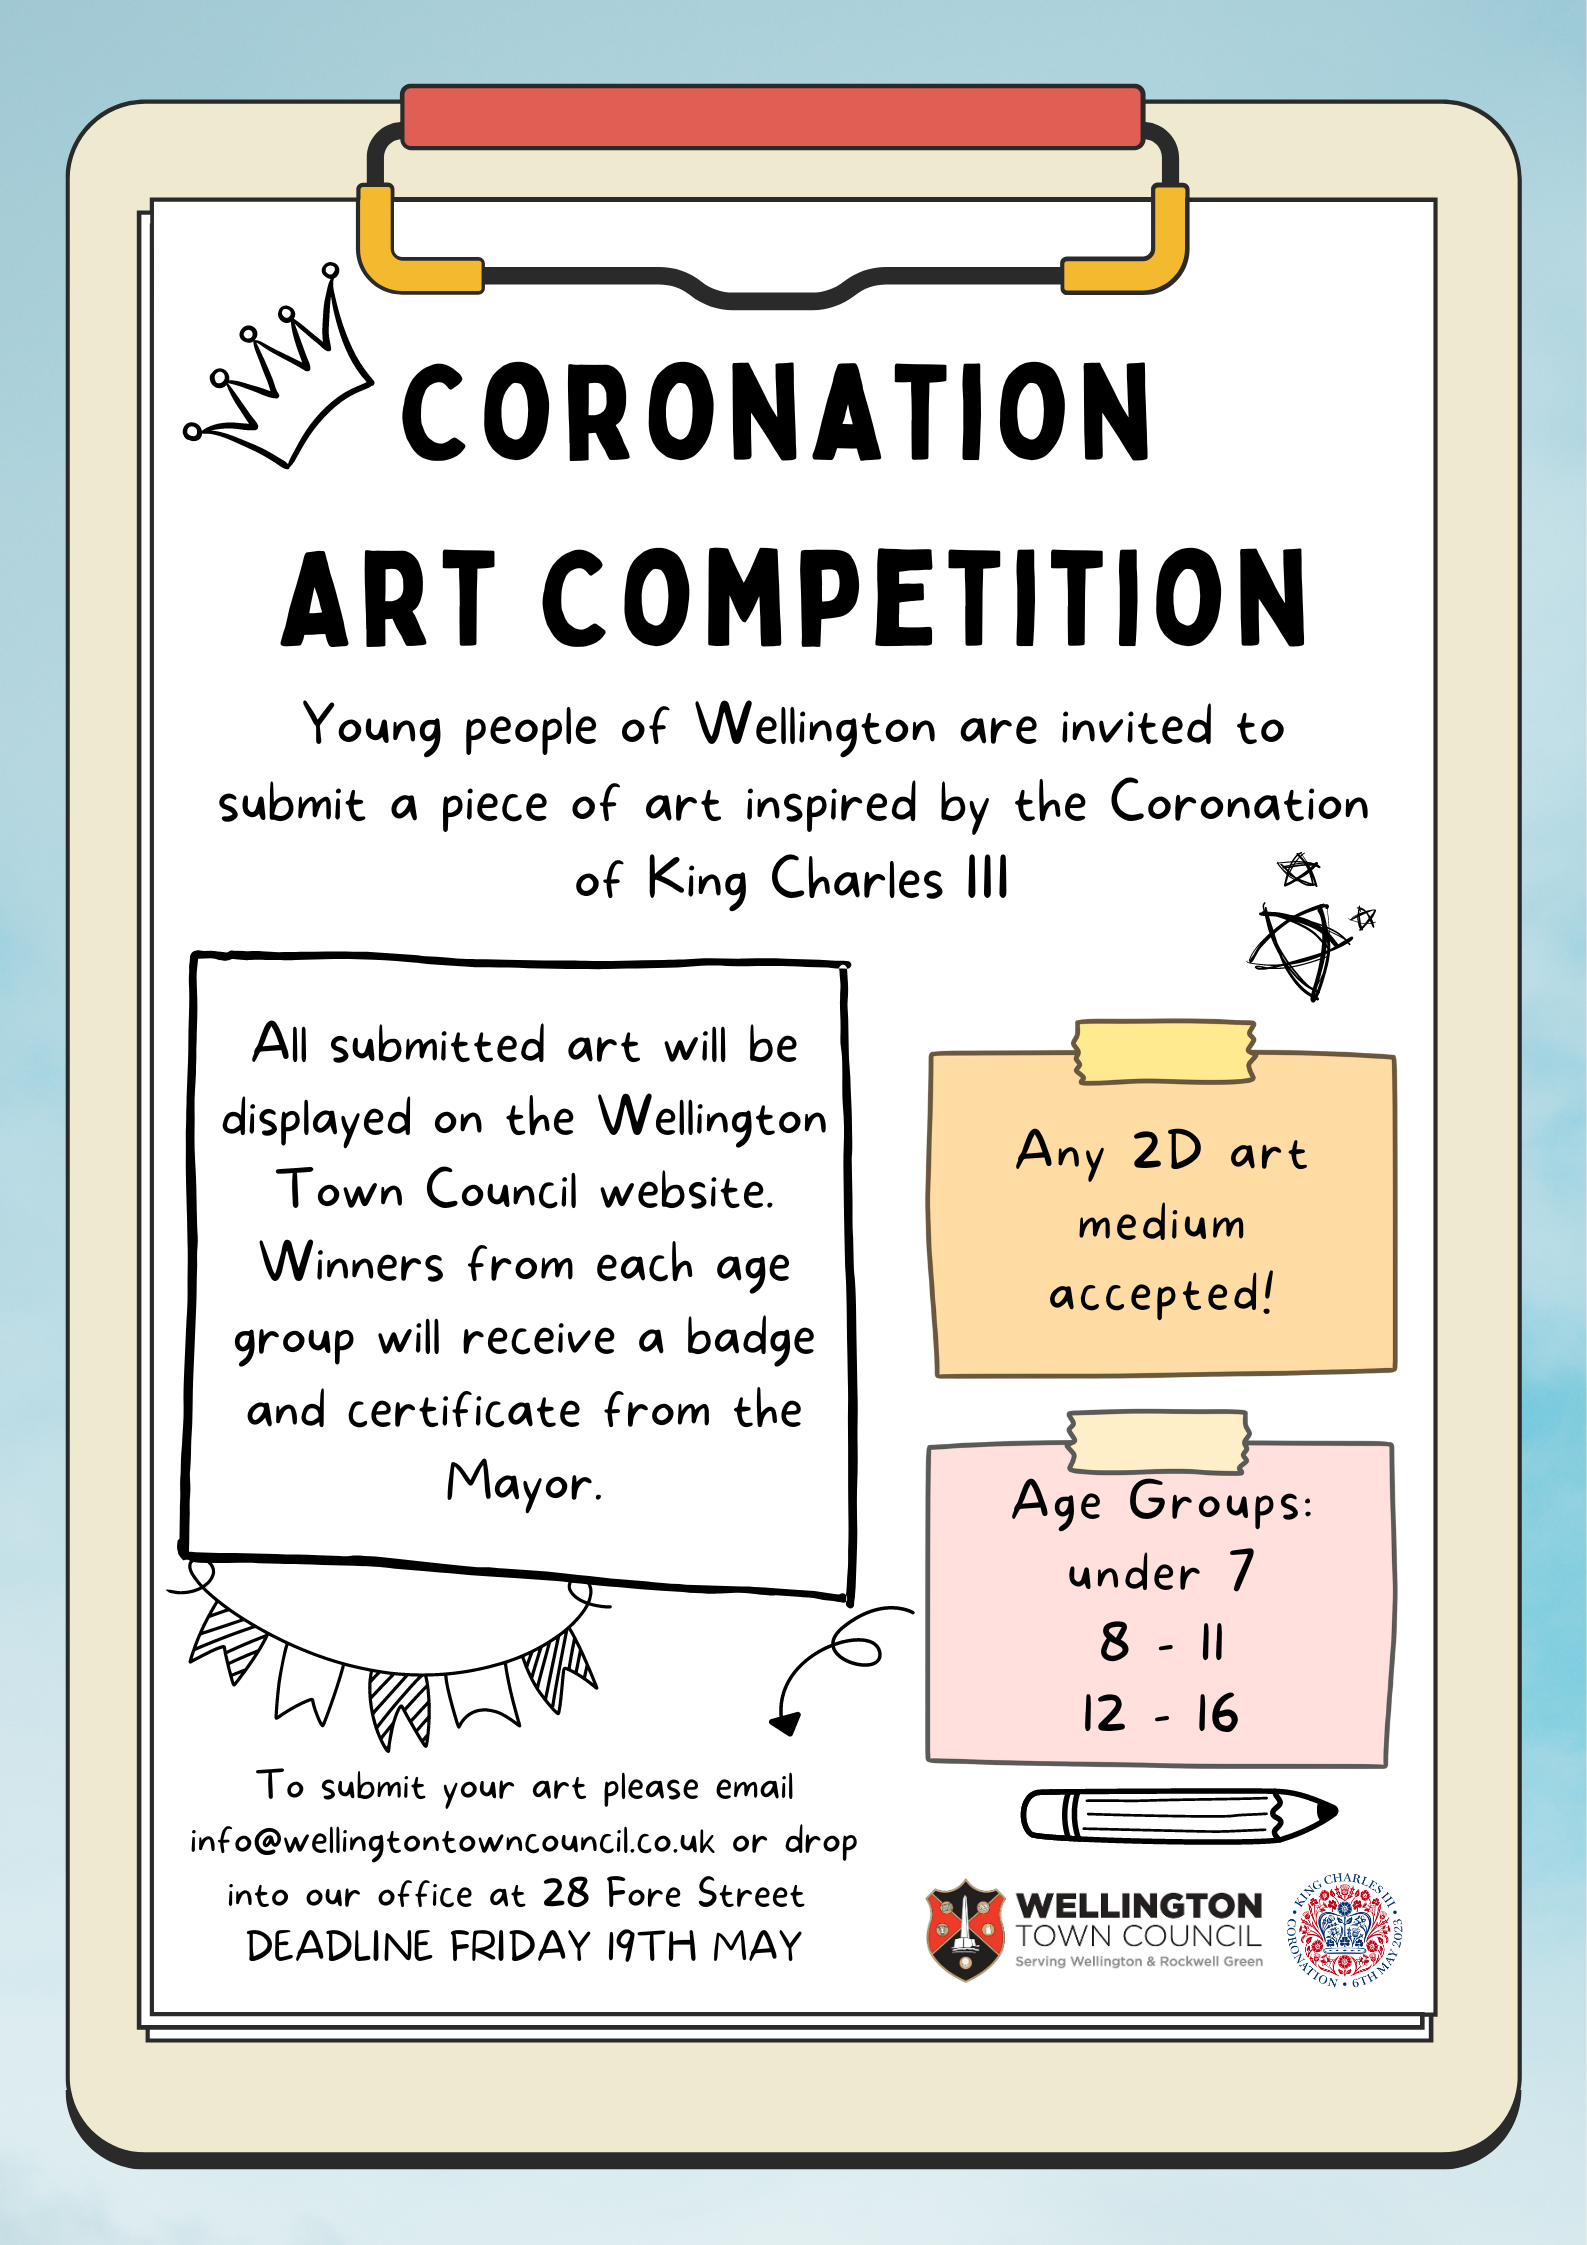 Coronation Art Competition. Young people of Wellington are invited to submit a piece of art inspired by the Coronation of King Charles III. All submitted art will be displayed on this website. Winners from each age group will receive a badge and certificate from the Mayor. Any 2D art medium accepted. Age groups: under 7, 8 to 11. 12 to 16. To submit your art, please email info@wellingtontowncouncil.co.uk or drop into our office at 28 Fore Street. Deadline Friday 19th May.